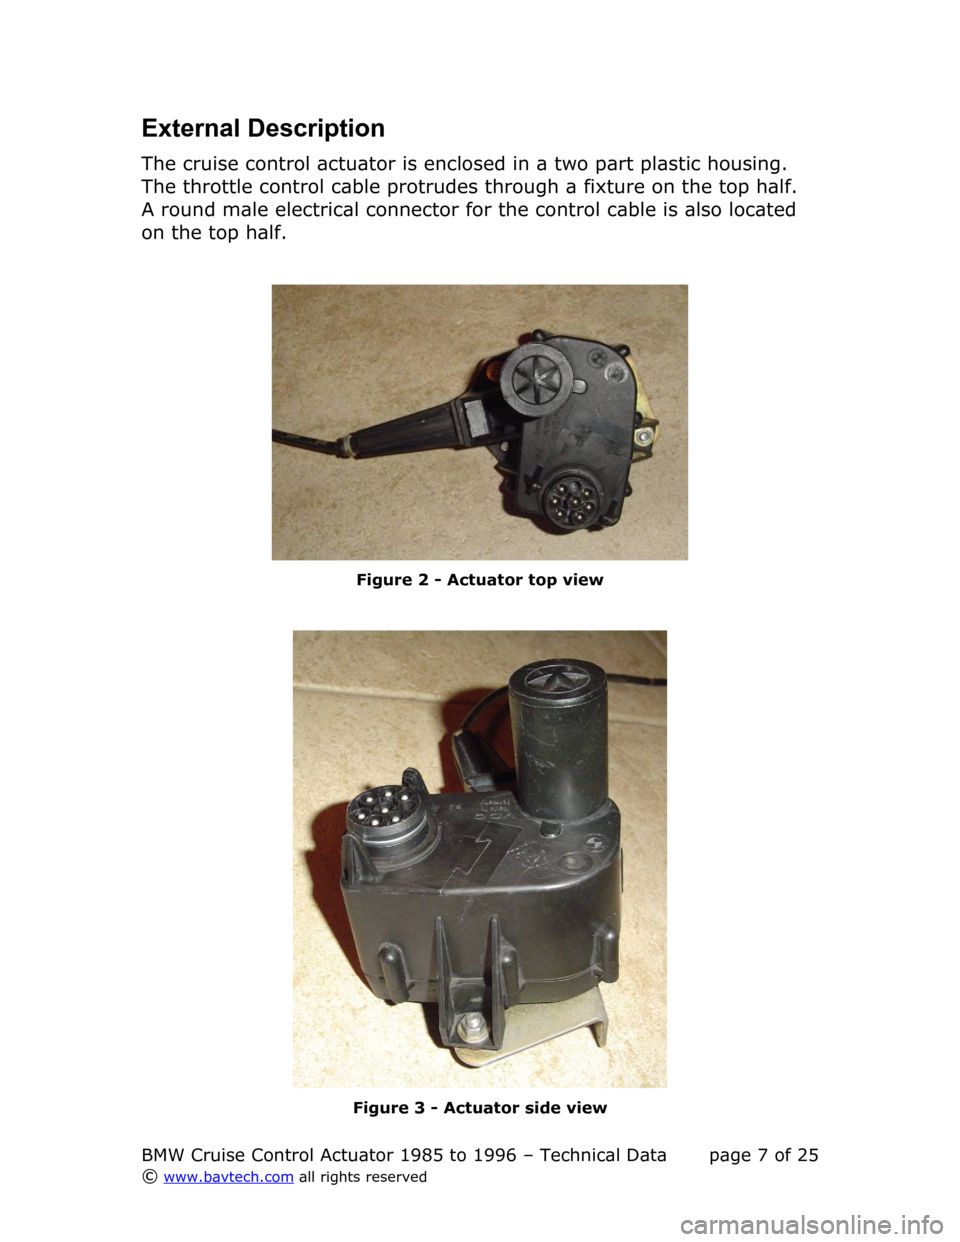 BMW 5 SERIES 1993 E34 Cruise Control Acutator External Description
The cruise control actuator is enclosed in a two part plastic housing.  
The throttle control cable protrudes through a fixture on the top half.  
A round male electrical connecto